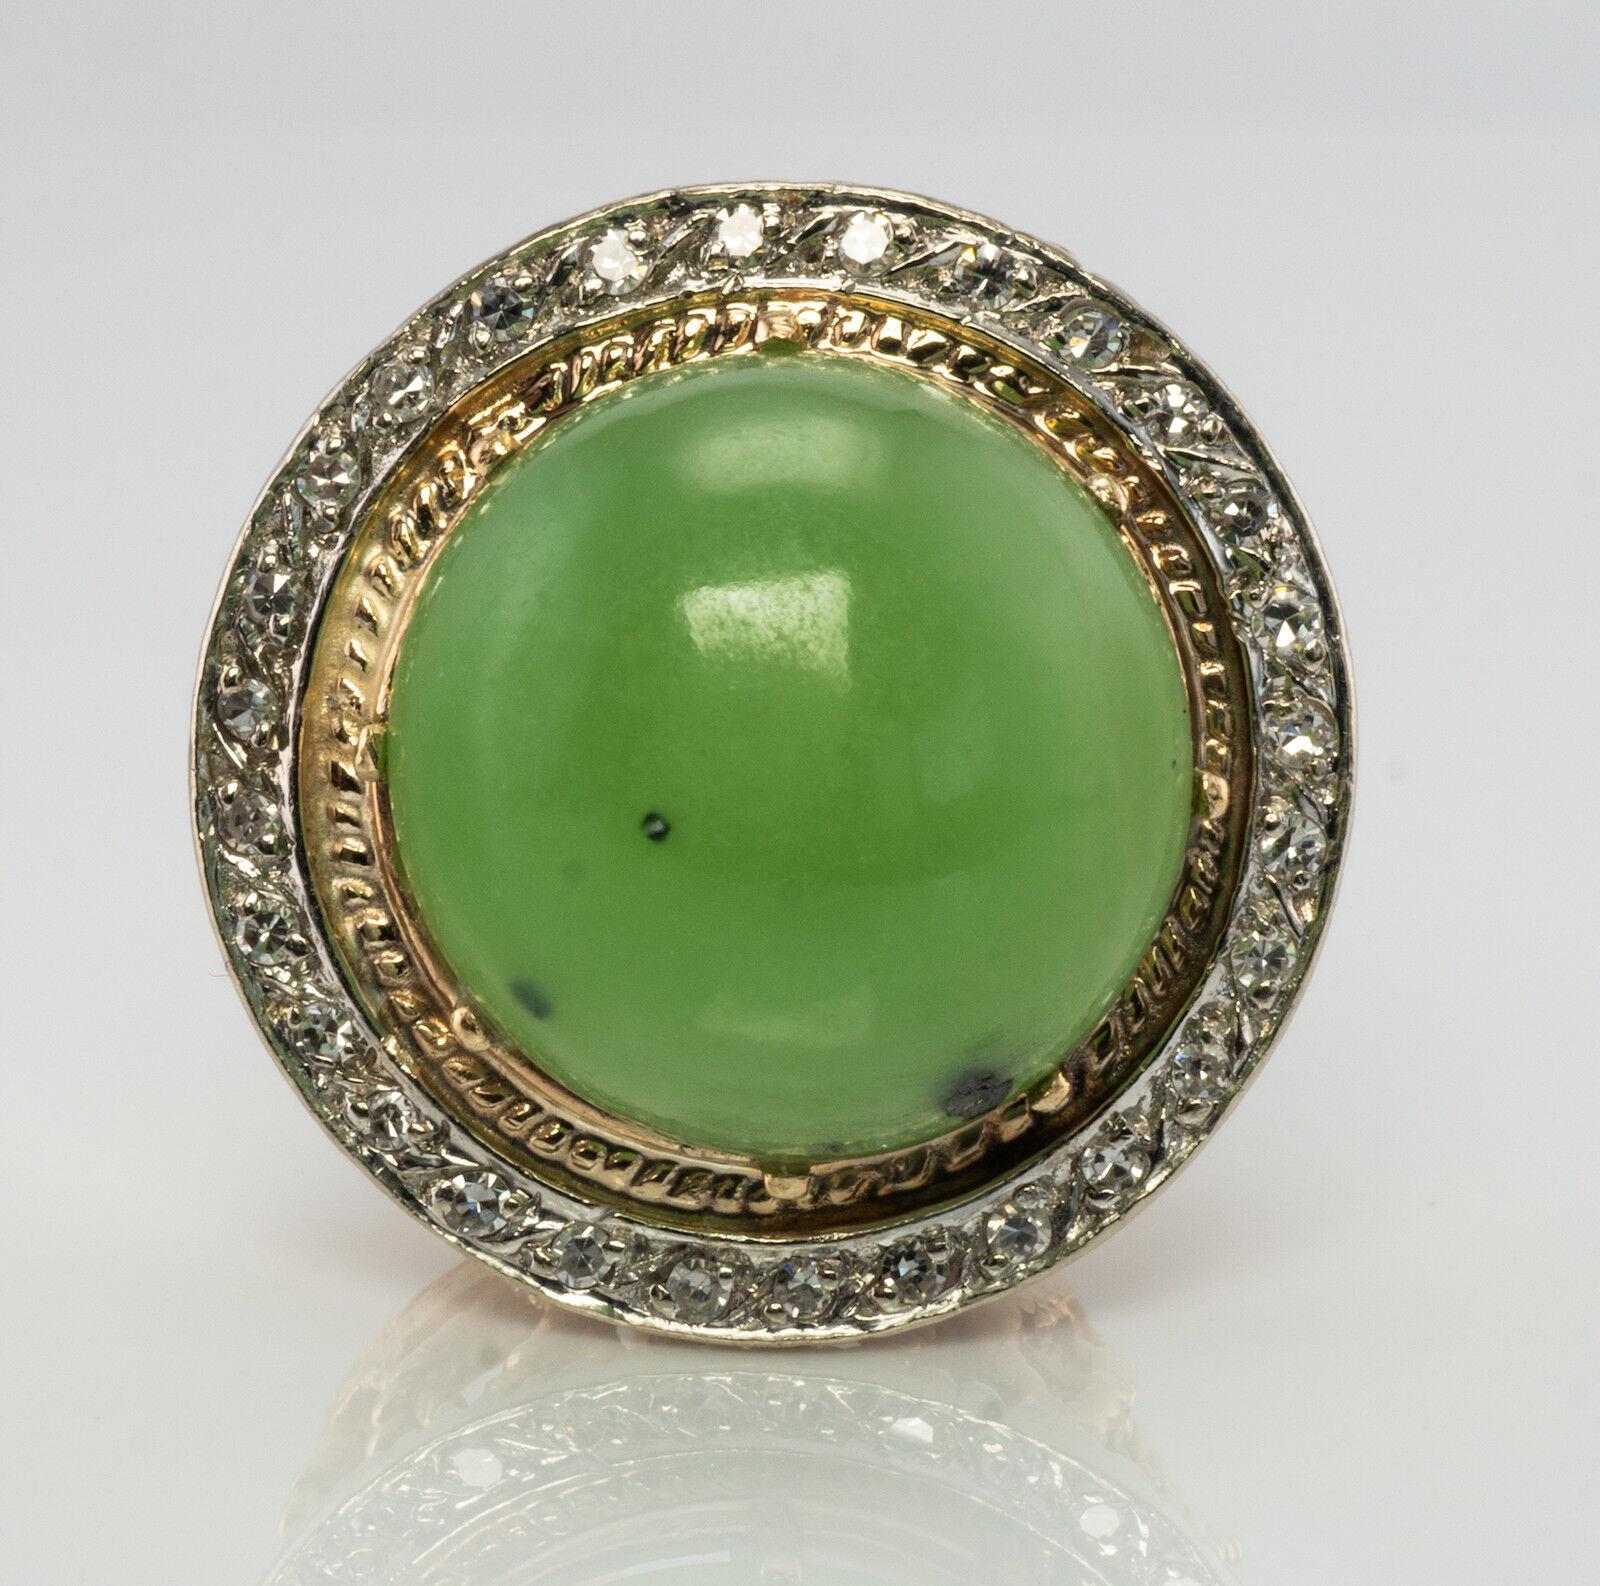 Diamond Jade Ring Cabochon 14K Gold Vintage

This terrific vintage ring is finely crafted in solid 14K Yellow gold (carefully tested and guaranteed) and set with Natural Jade and single cut Diamonds. There are 28 single cut diamonds set in white